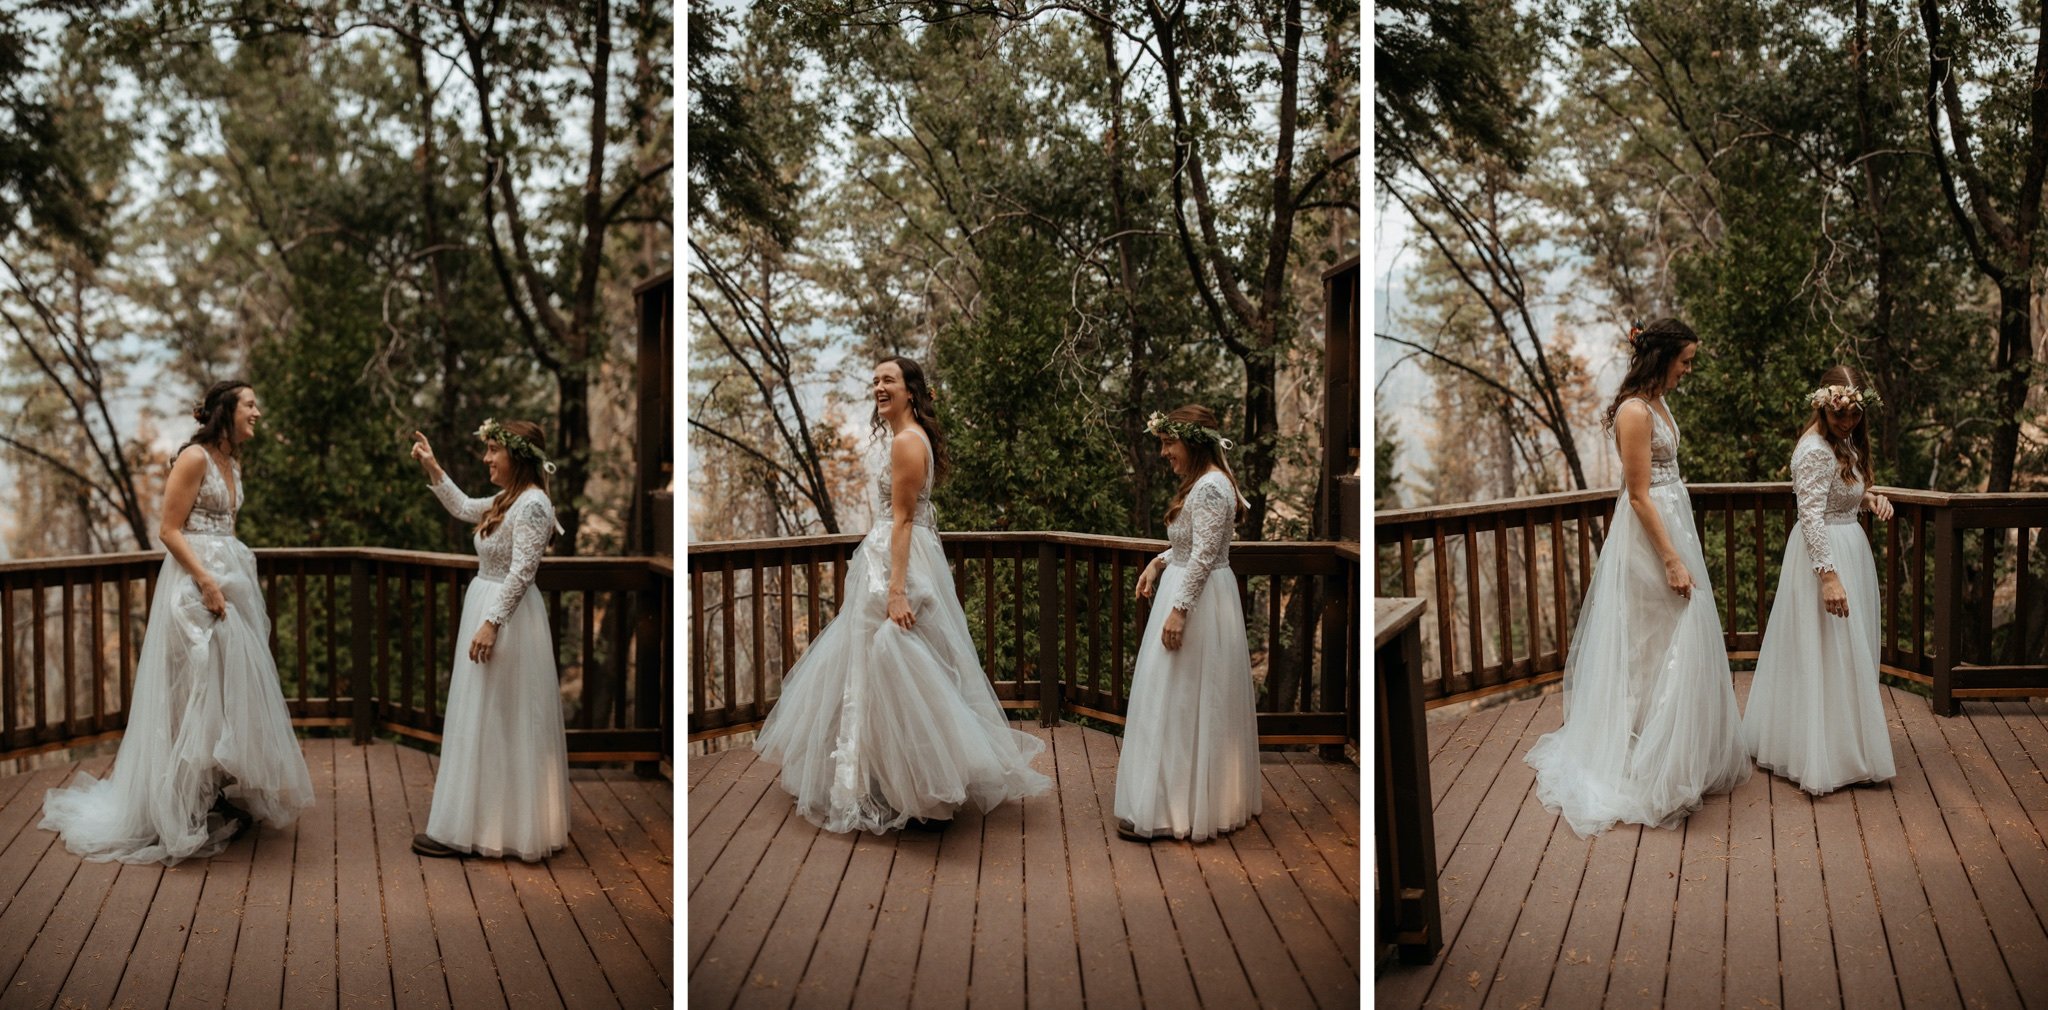 Yosemite National Park Elopement with Two Brides-Will Khoury21.jpg